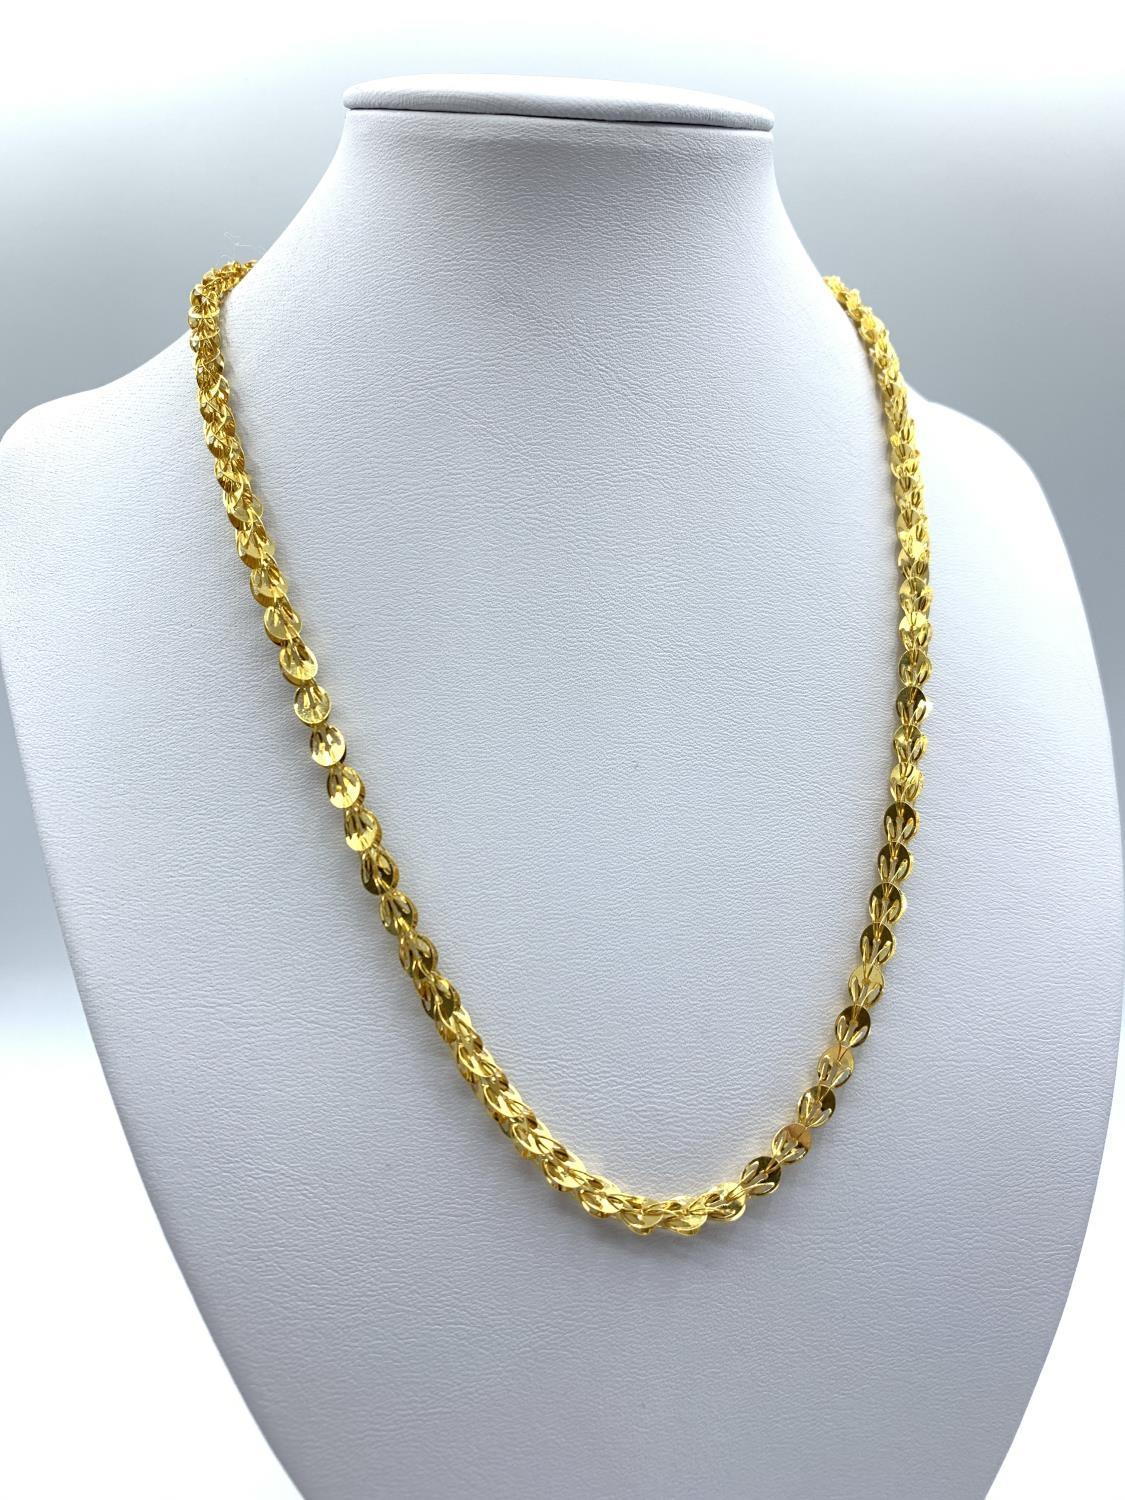 24ct Gold Necklace From The Far East Intricate Unique Design 16.4g 45cm - Image 2 of 10